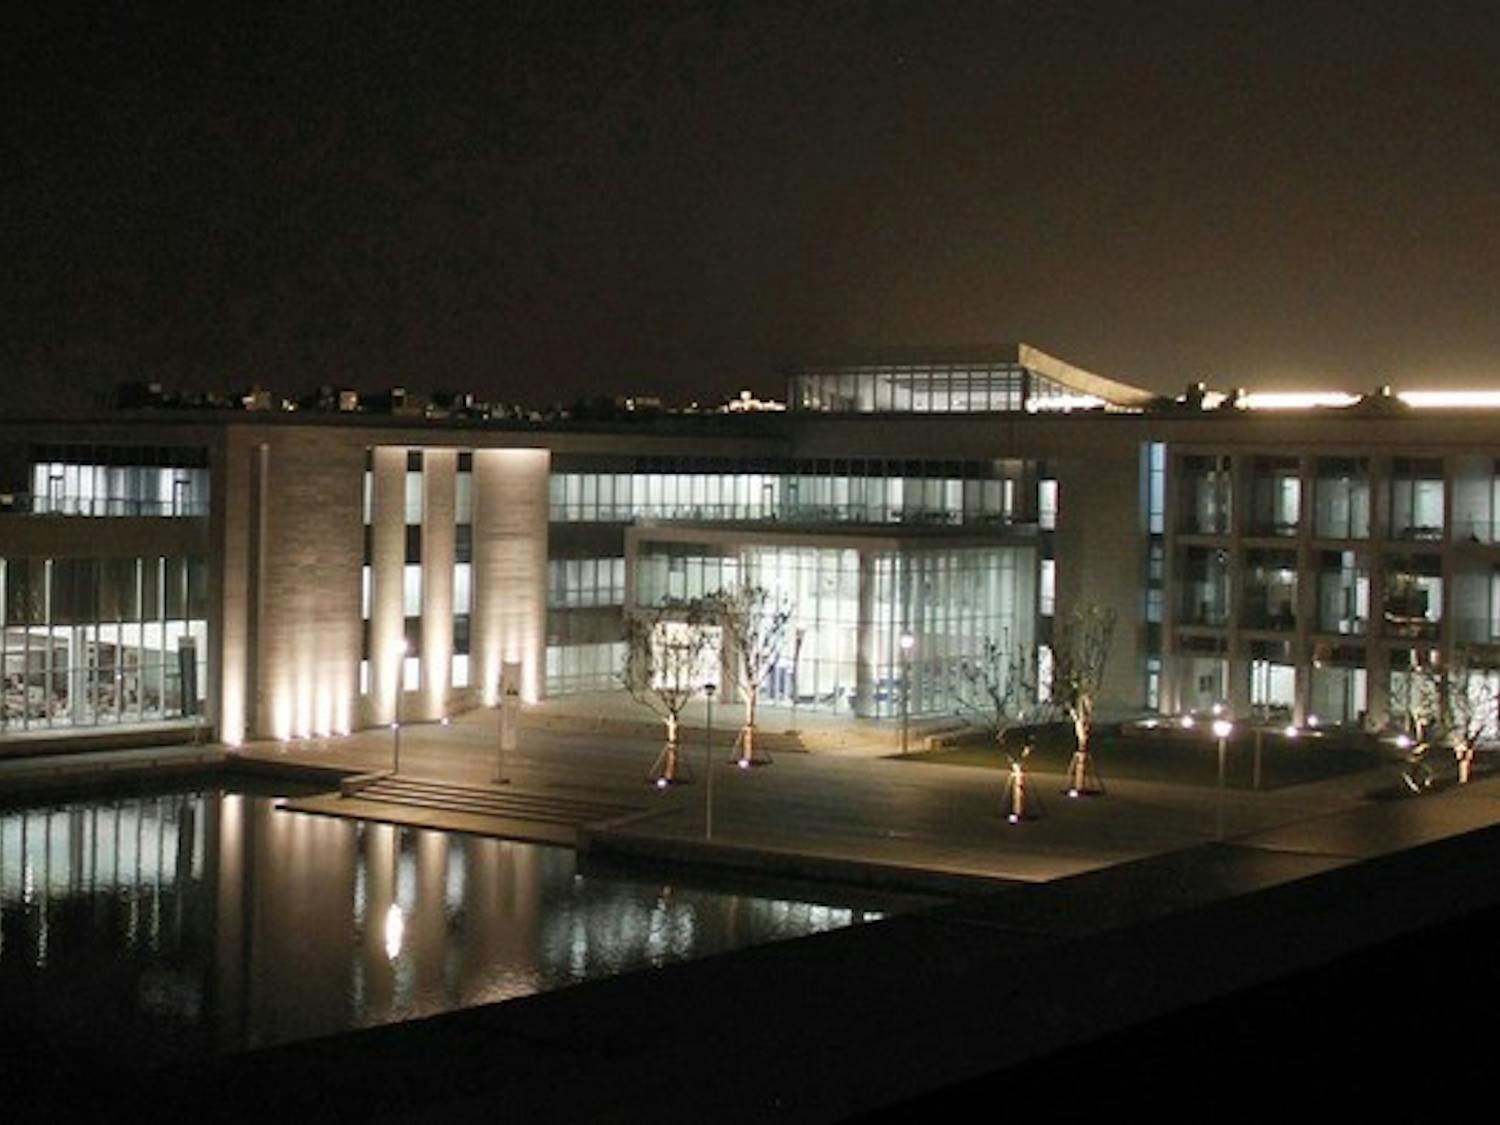 The Academic Council spent most of its meeting privately discussing Duke Kunshan University, pictured above.